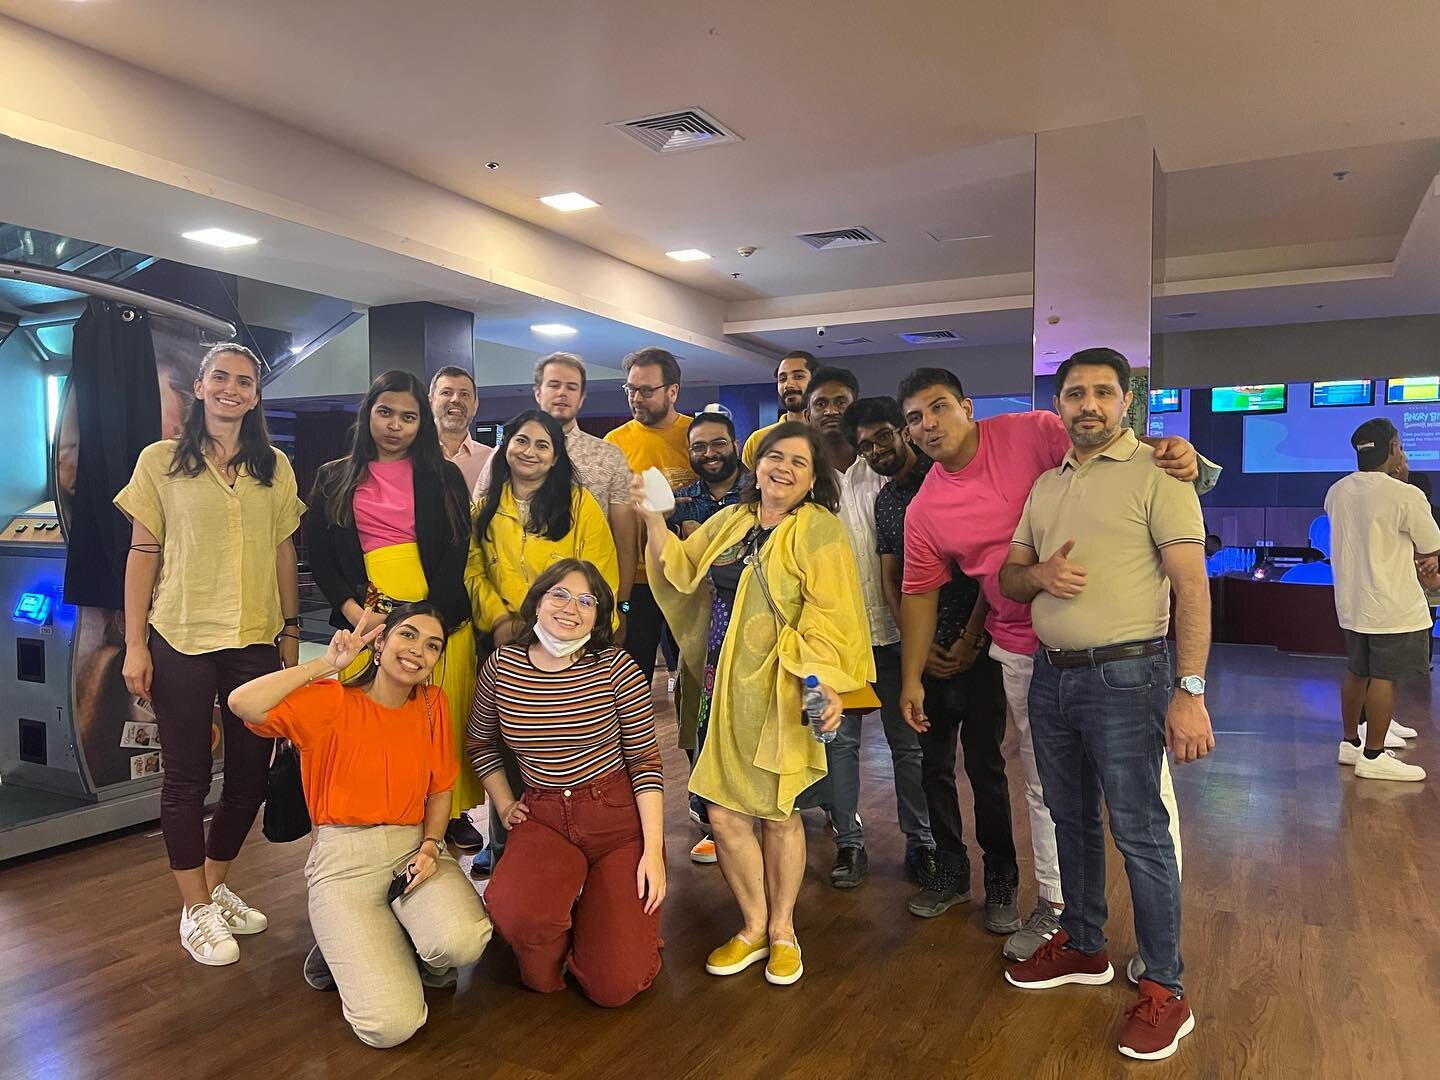 SOMETIMES IT HAS TO BE BOWLING&hellip;.. to make architects wear something colourful.
#wwfca #wwfarchitects #bowling #teambuilding #bestteamever💪